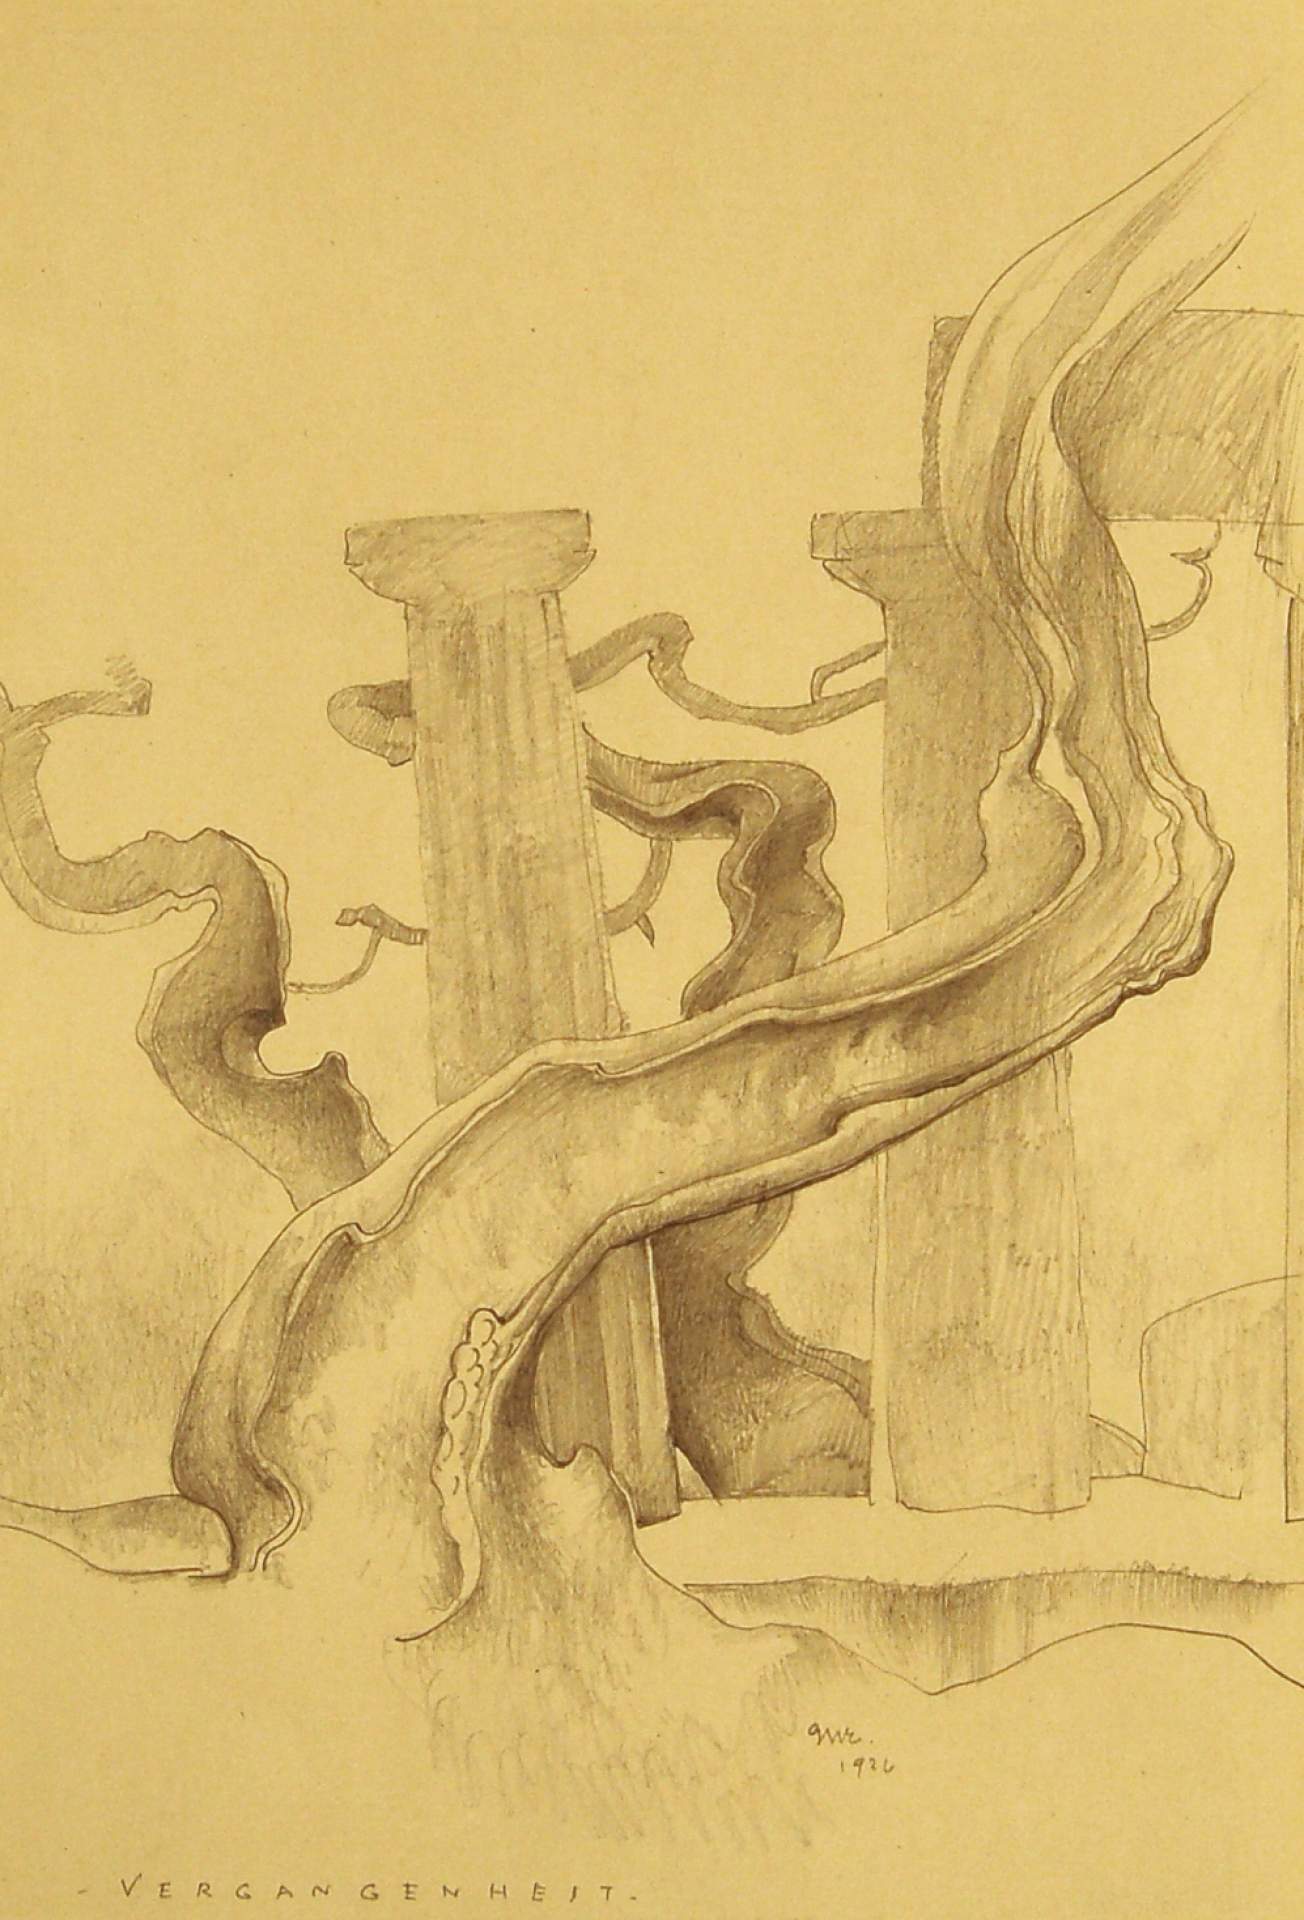 Columns and Trees, Vergangenhest